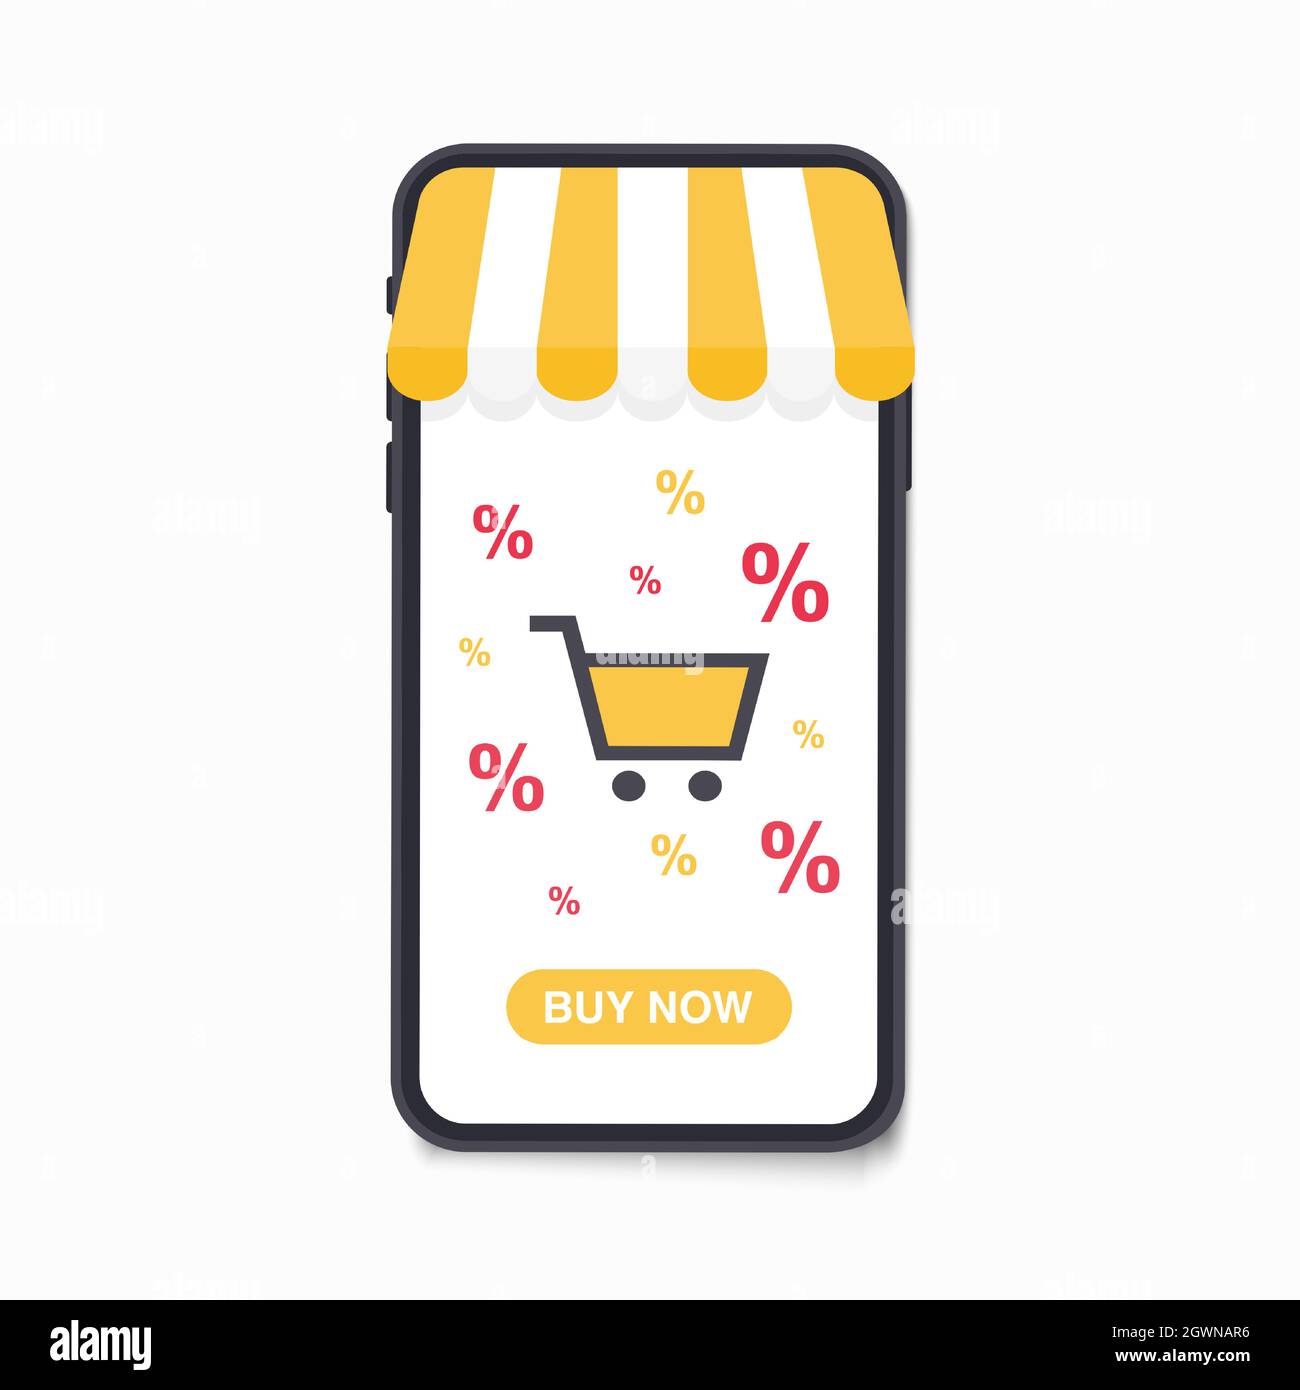 Online shopping background, with illustrations of mobile phones and simple shopping bags. Vector Stock Vector